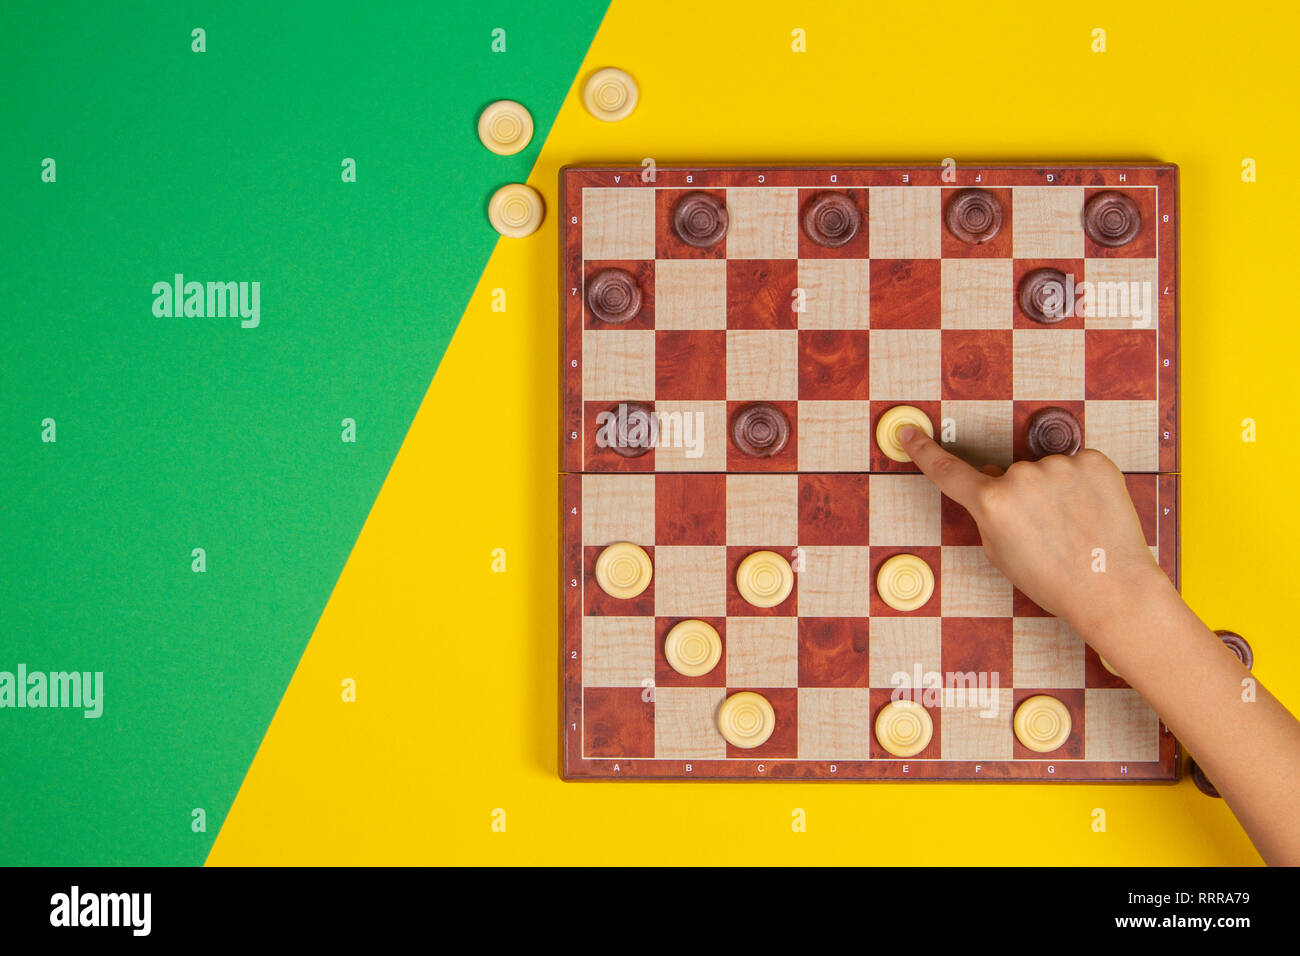 Child hand playing checkers on checker board game over yellow and green background, top view Stock Photo